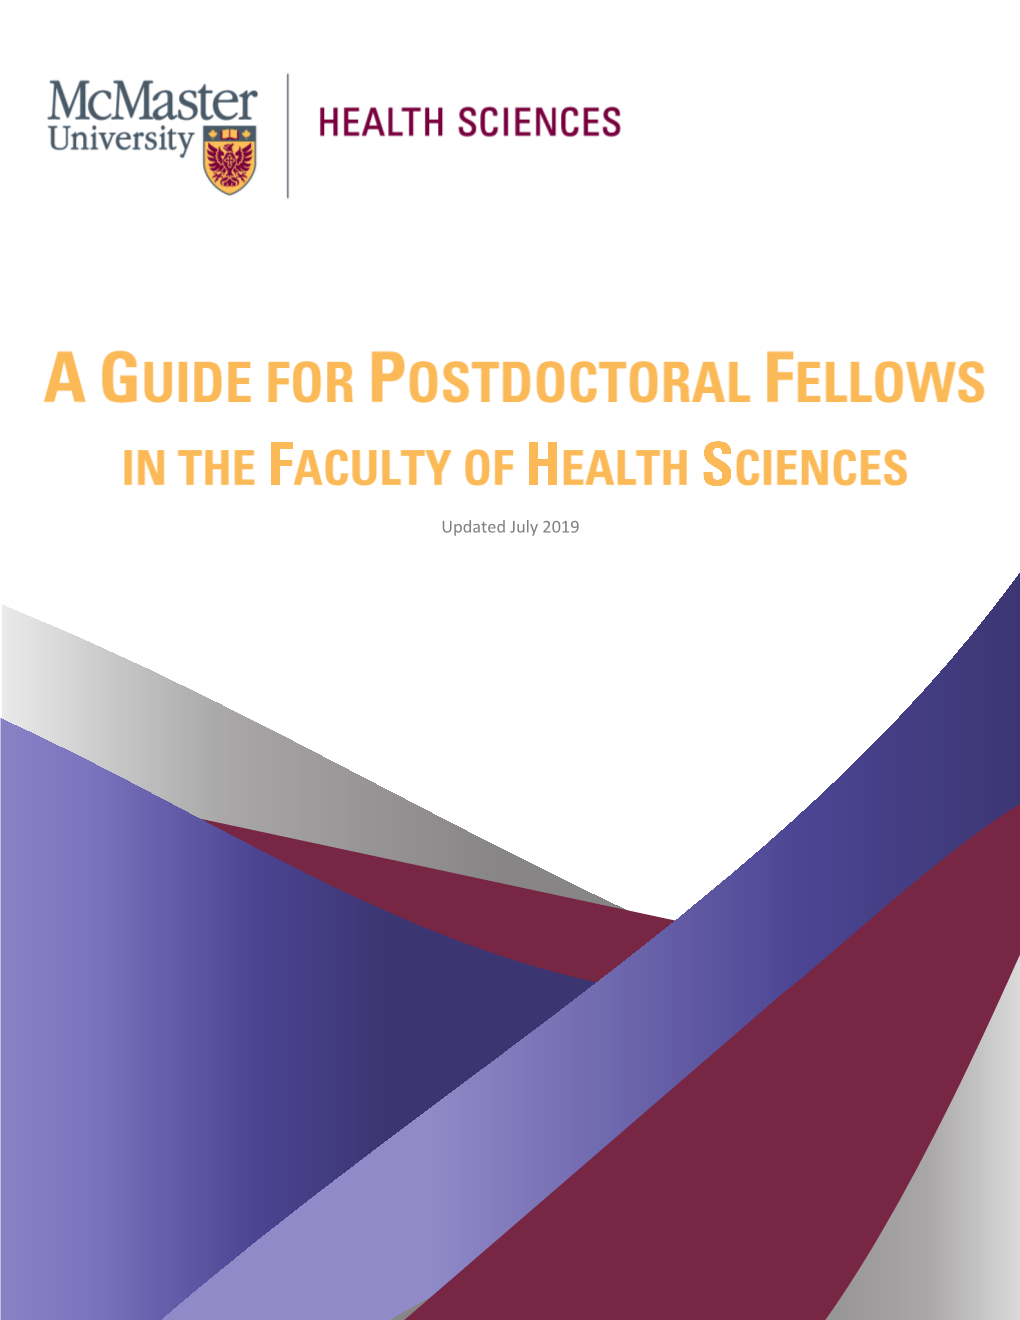 Guide for Postdoctoral Fellows in Health Sciences